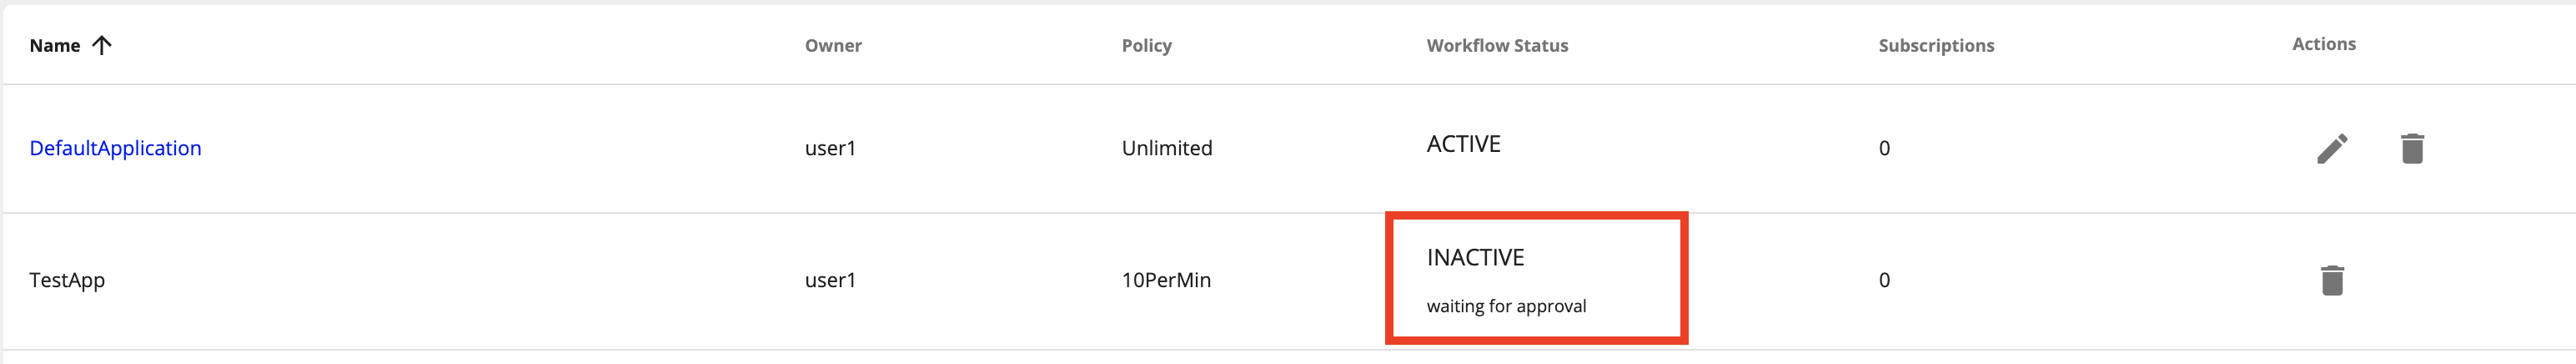 Application status is INACTIVE - Waiting for approval